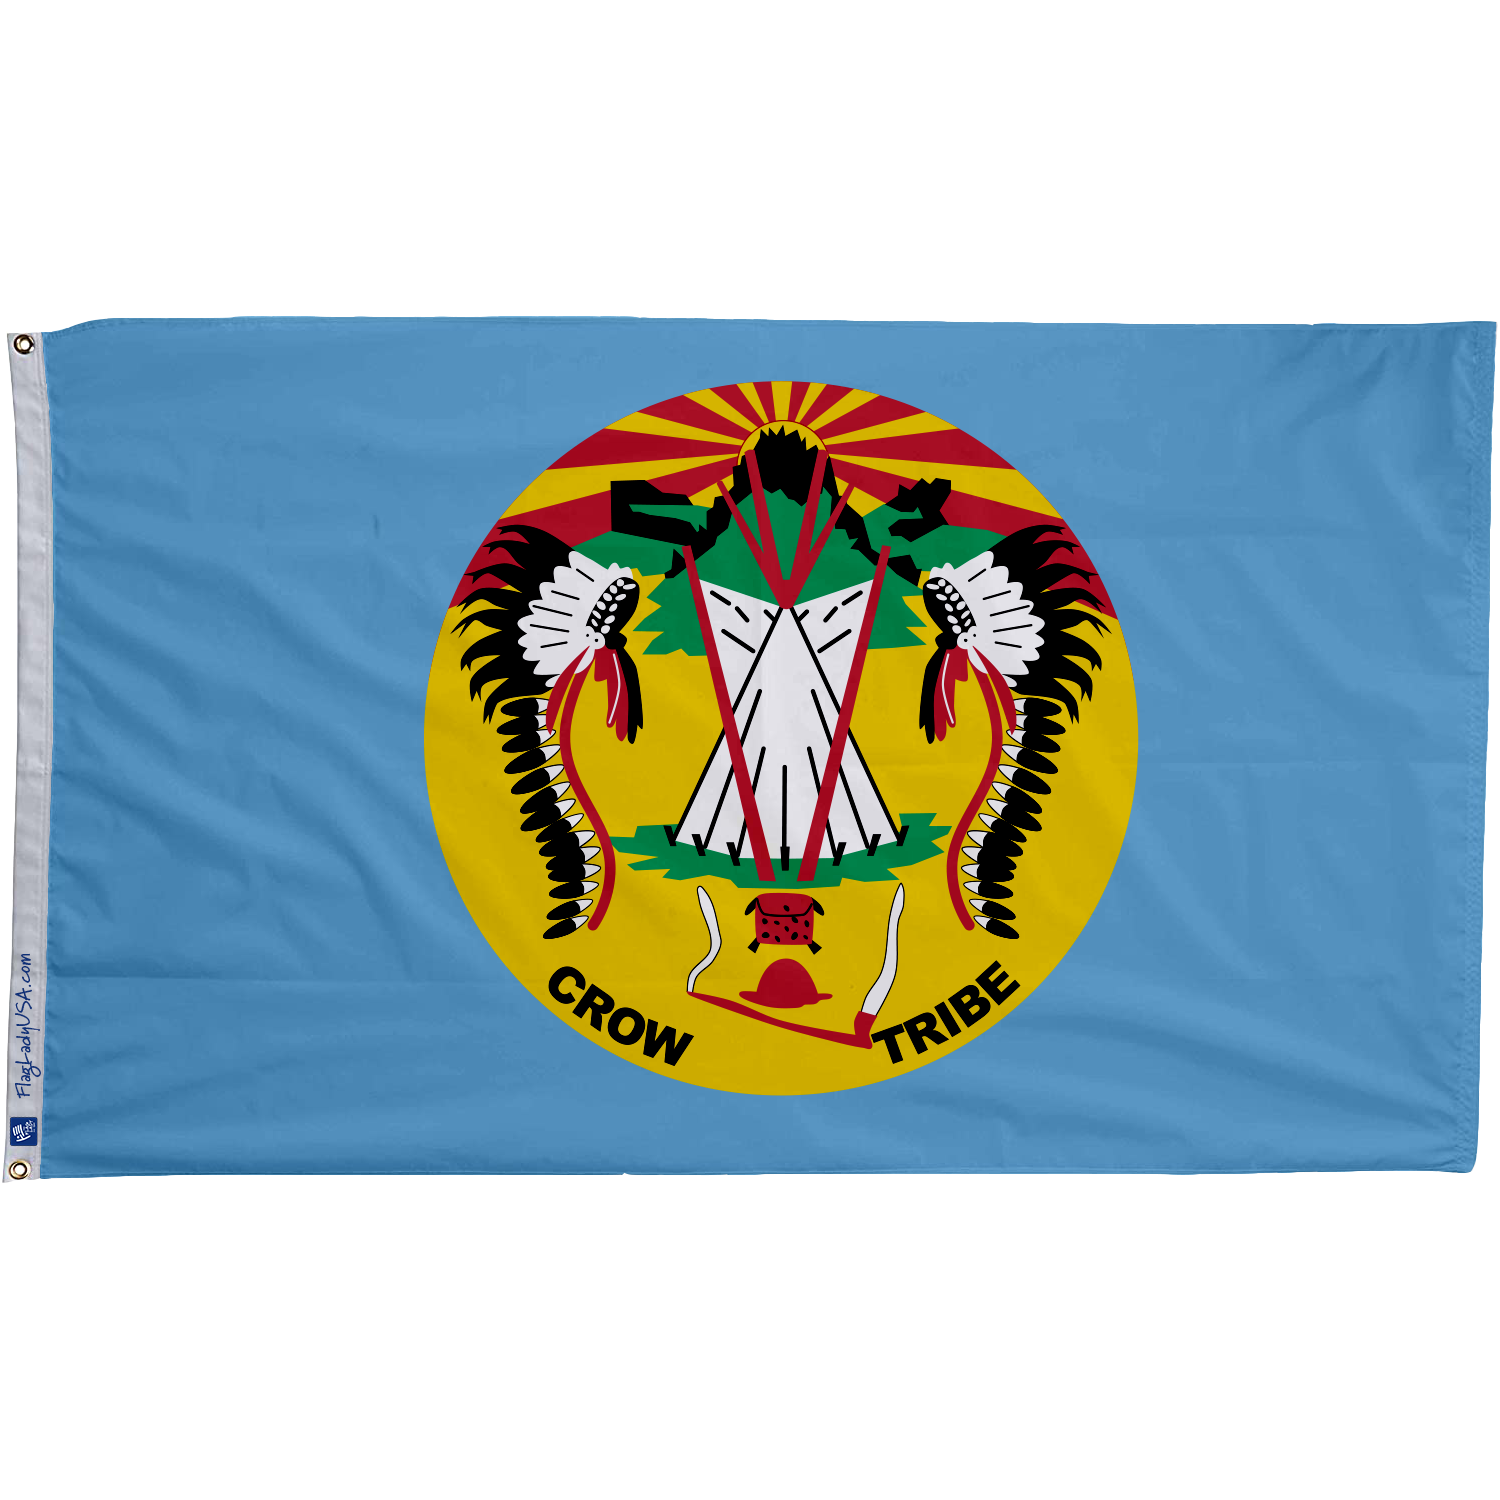 Crow Tribe Flags